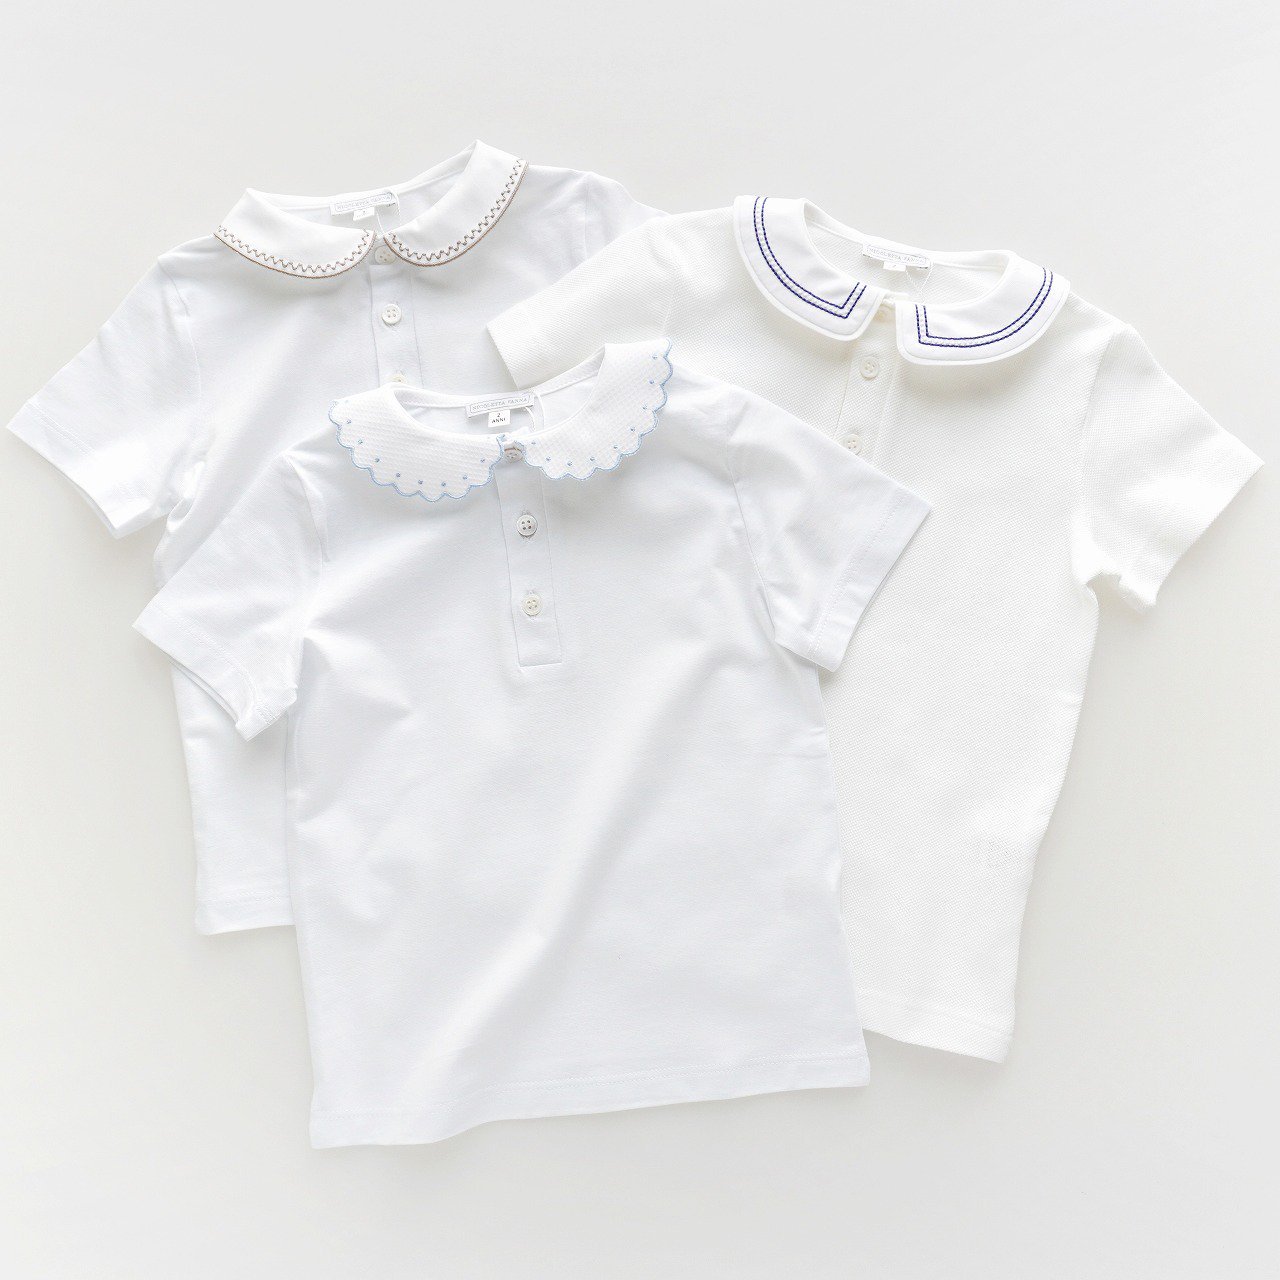 <img class='new_mark_img1' src='https://img.shop-pro.jp/img/new/icons1.gif' style='border:none;display:inline;margin:0px;padding:0px;width:auto;' />Nicoletta Fanna - Embroidery boy's tops (Dots/ Greige/ Navy)